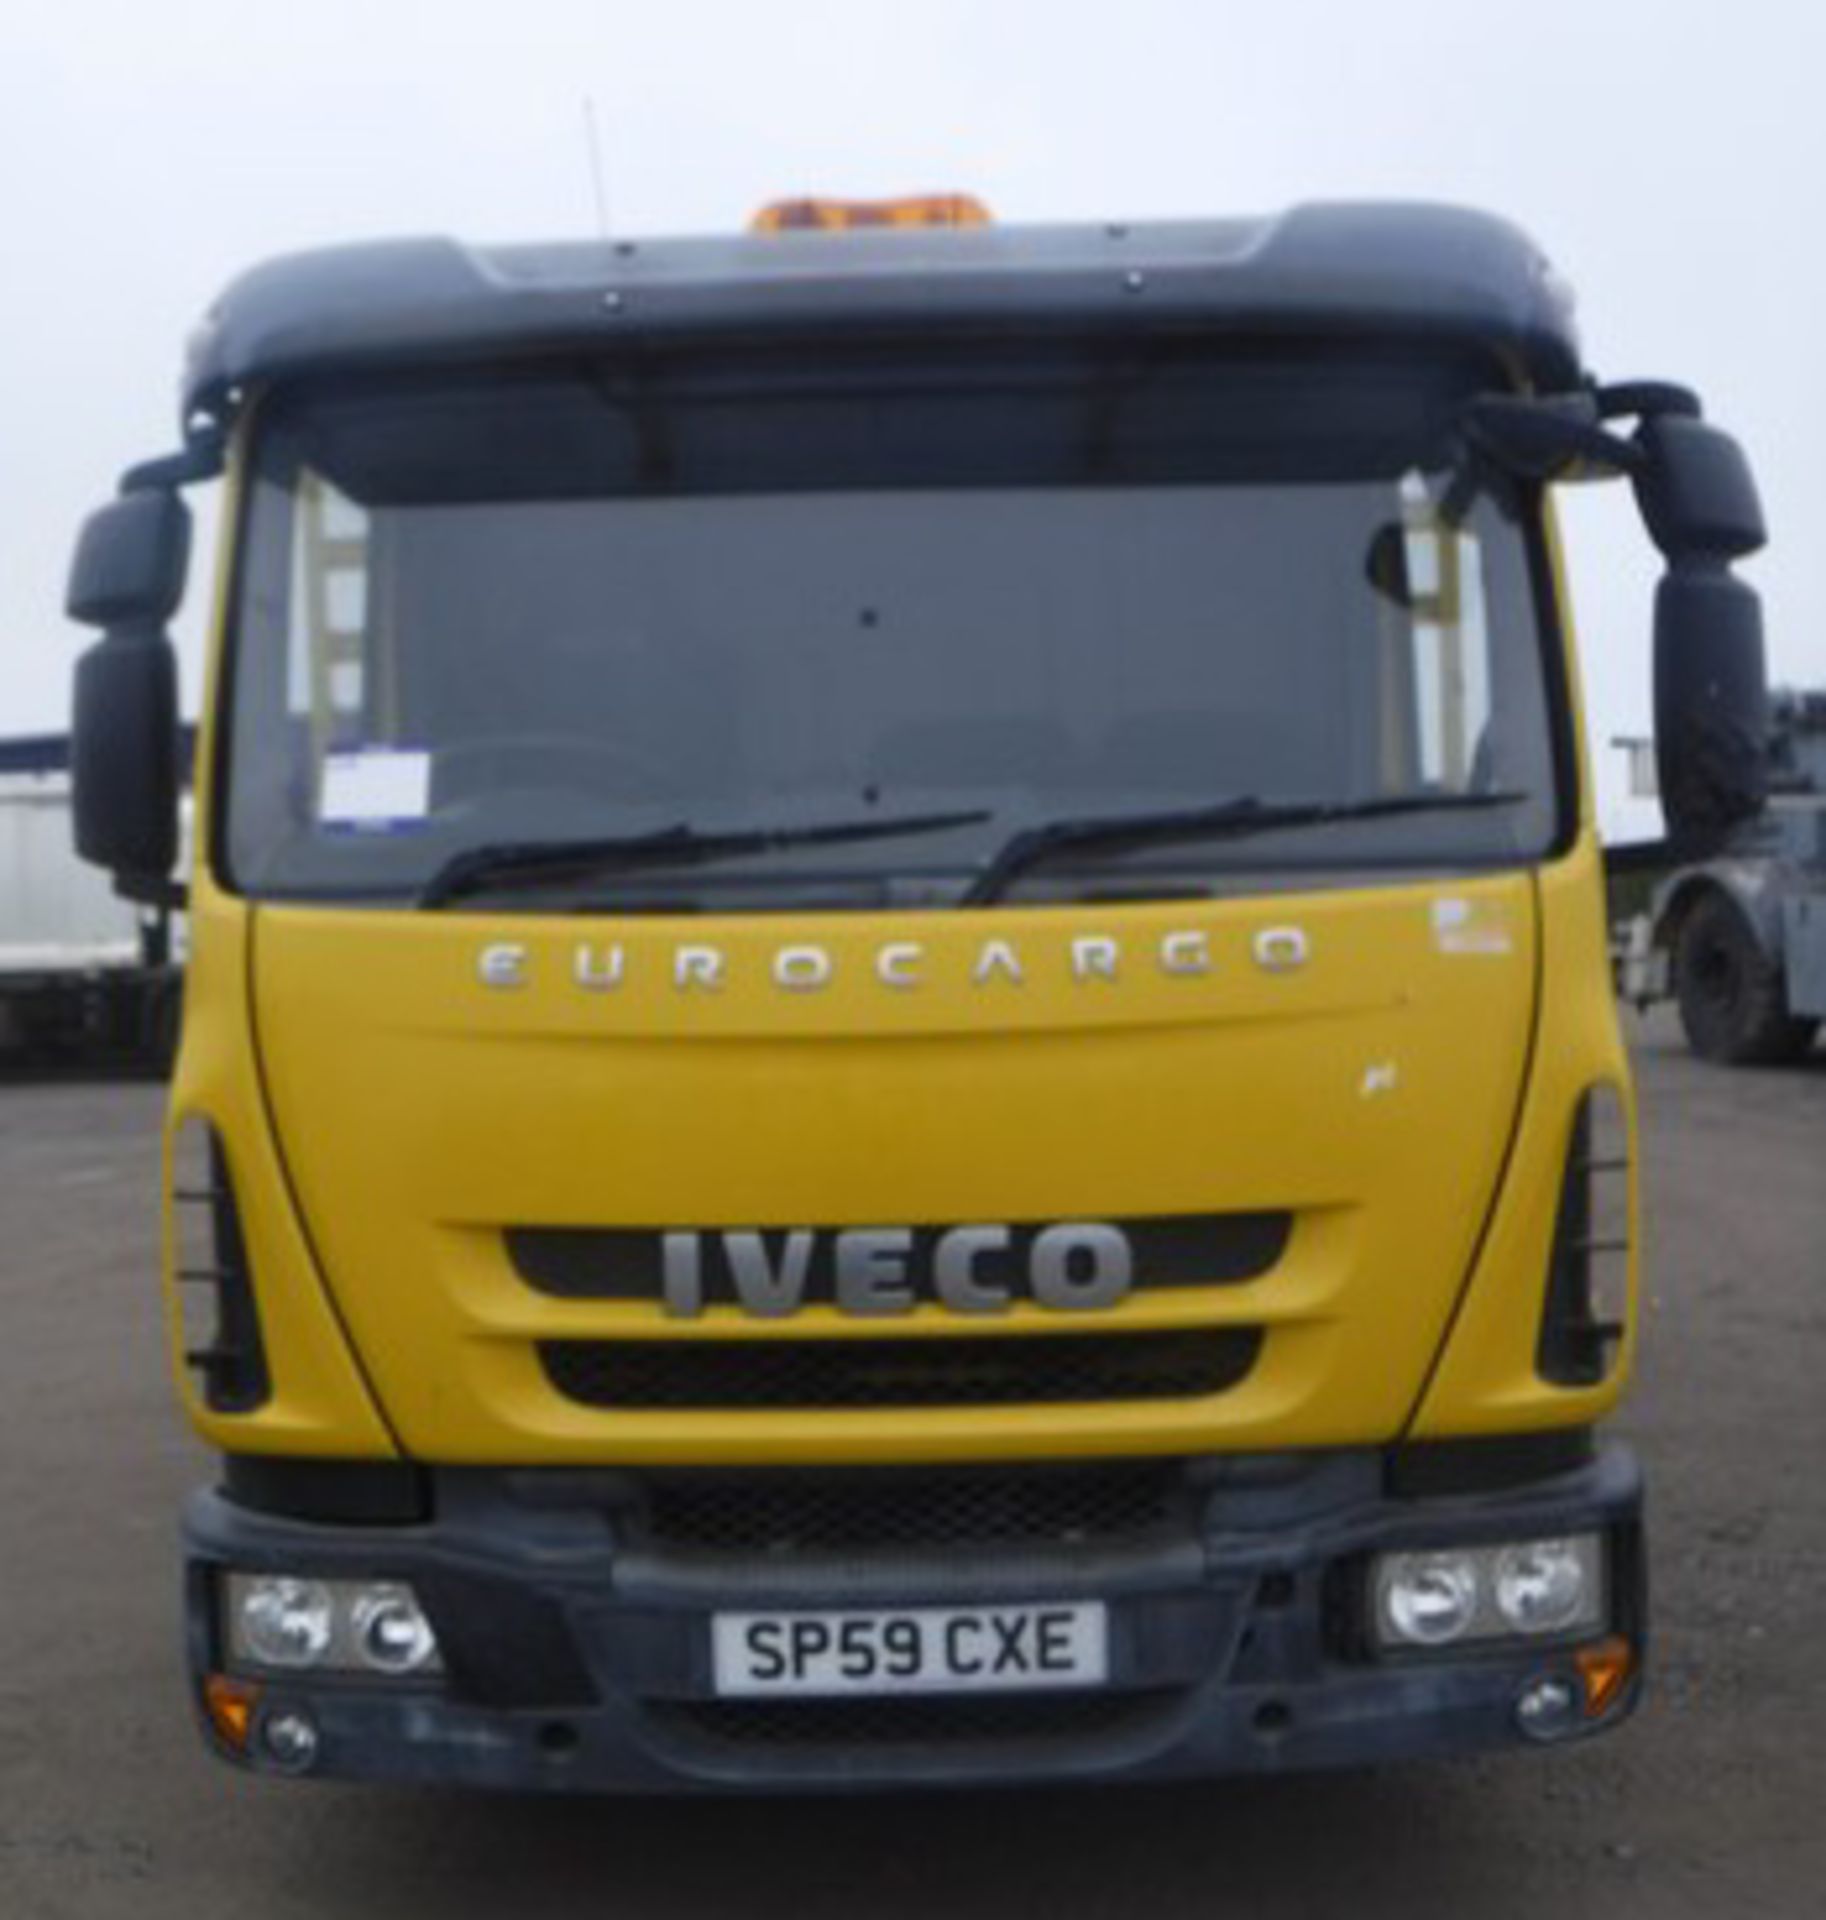 IVECO MODEL EUROCARGO (MY 2008) - 3920cc - Image 10 of 17